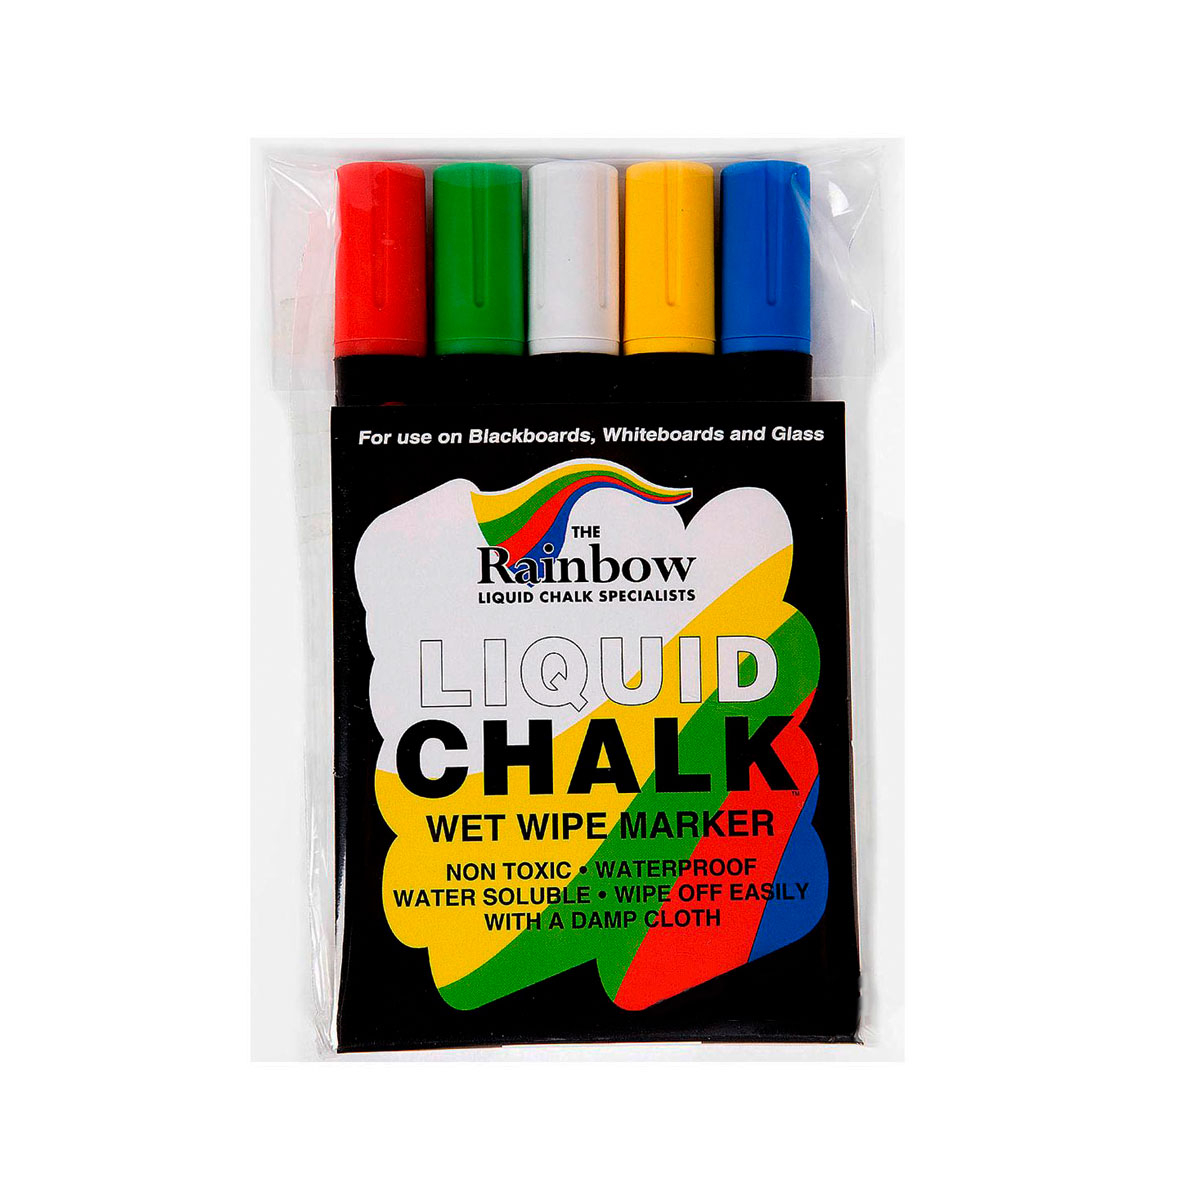 Chalkboard pens for use with wooden chalkboards. Pack of 4 liquid chalk pens in 4 colours, wipes clean with dry cloth.